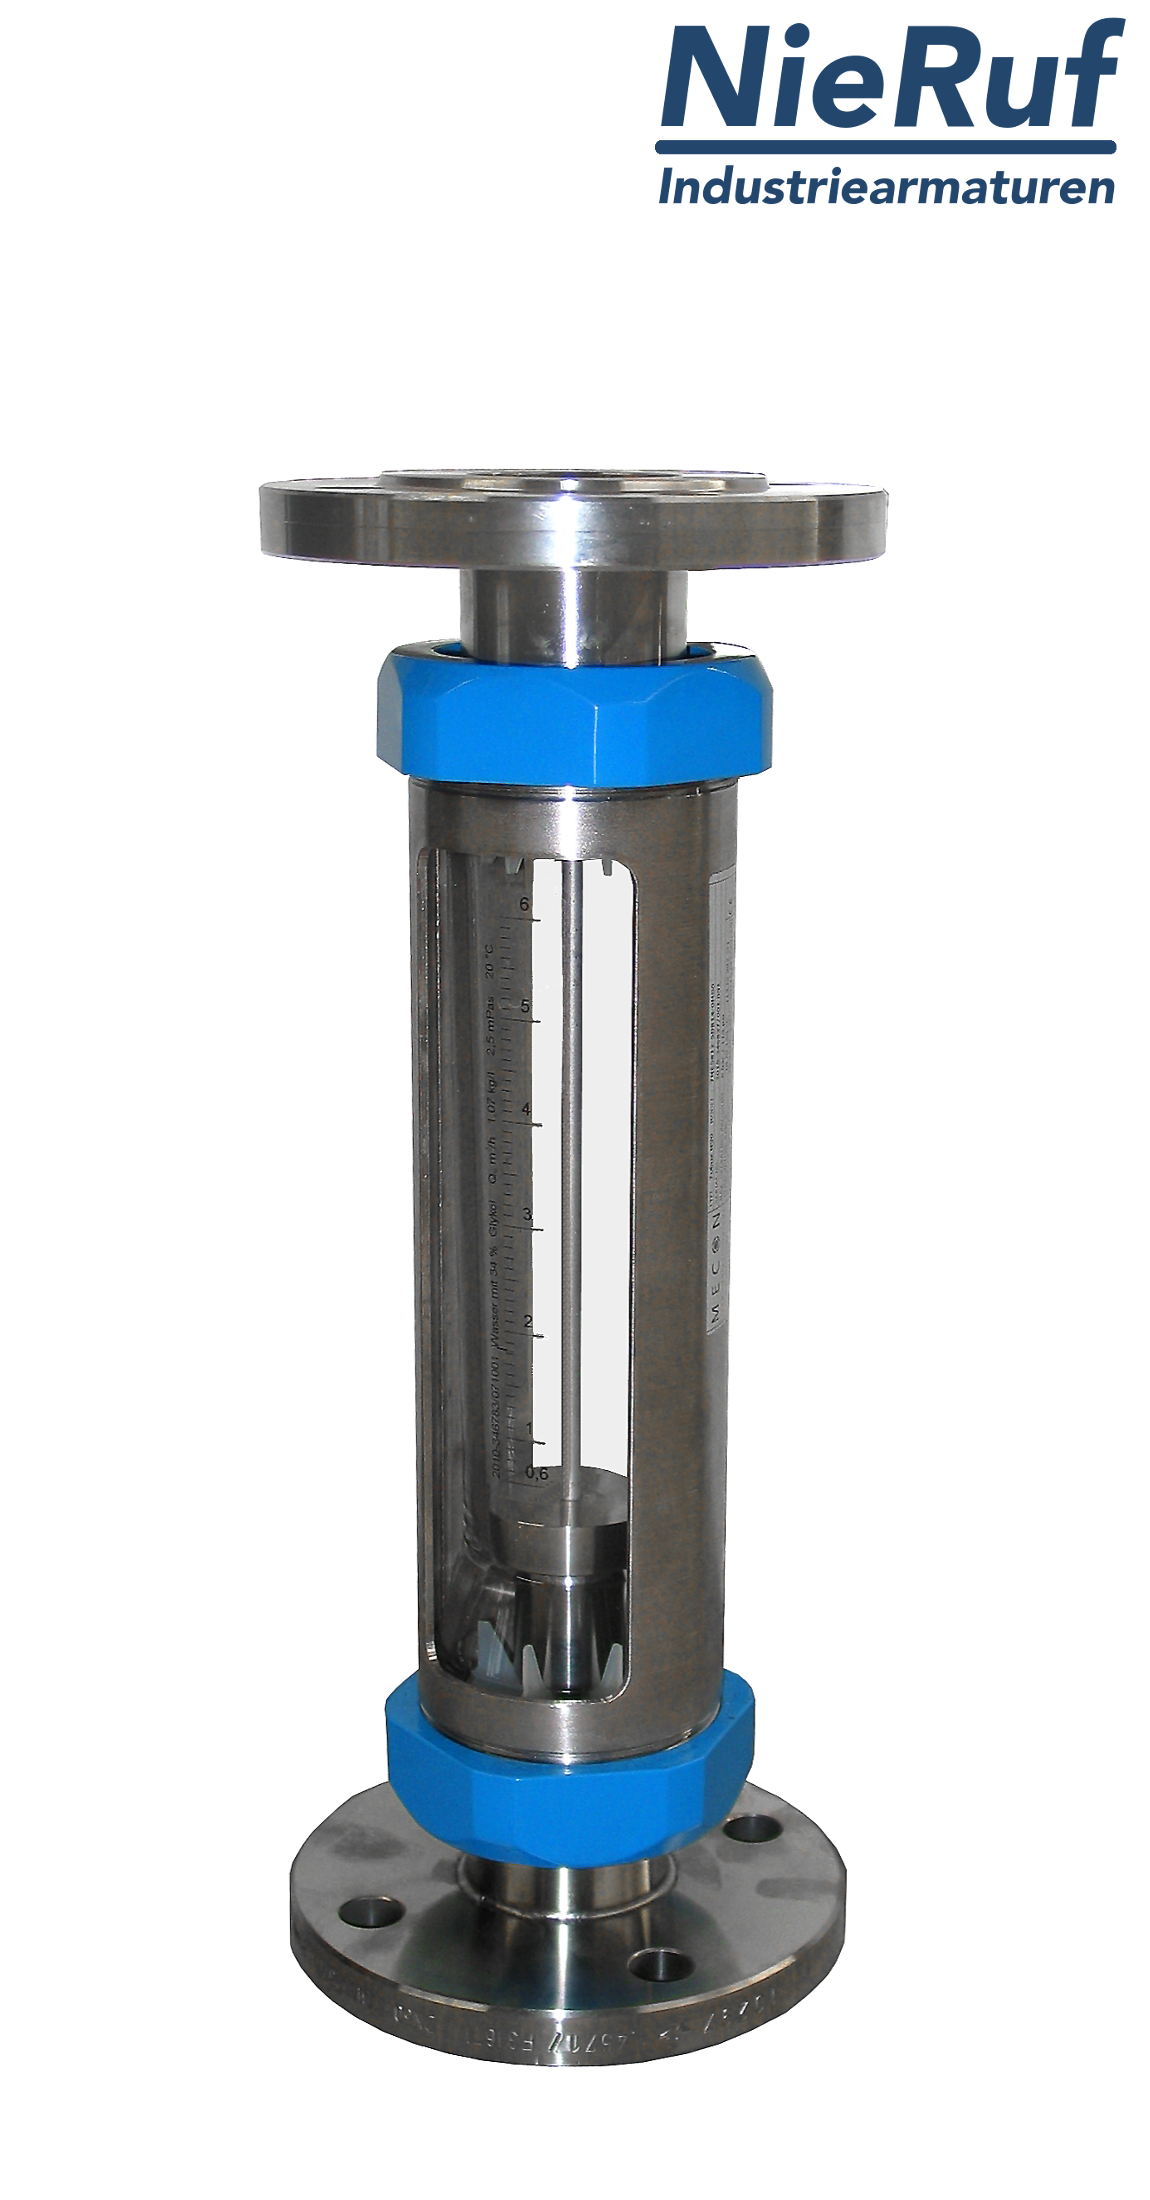 Variable area flowmeter stainless steel + borosilicate flange DN40 80.0 - 800 l/h water FKM